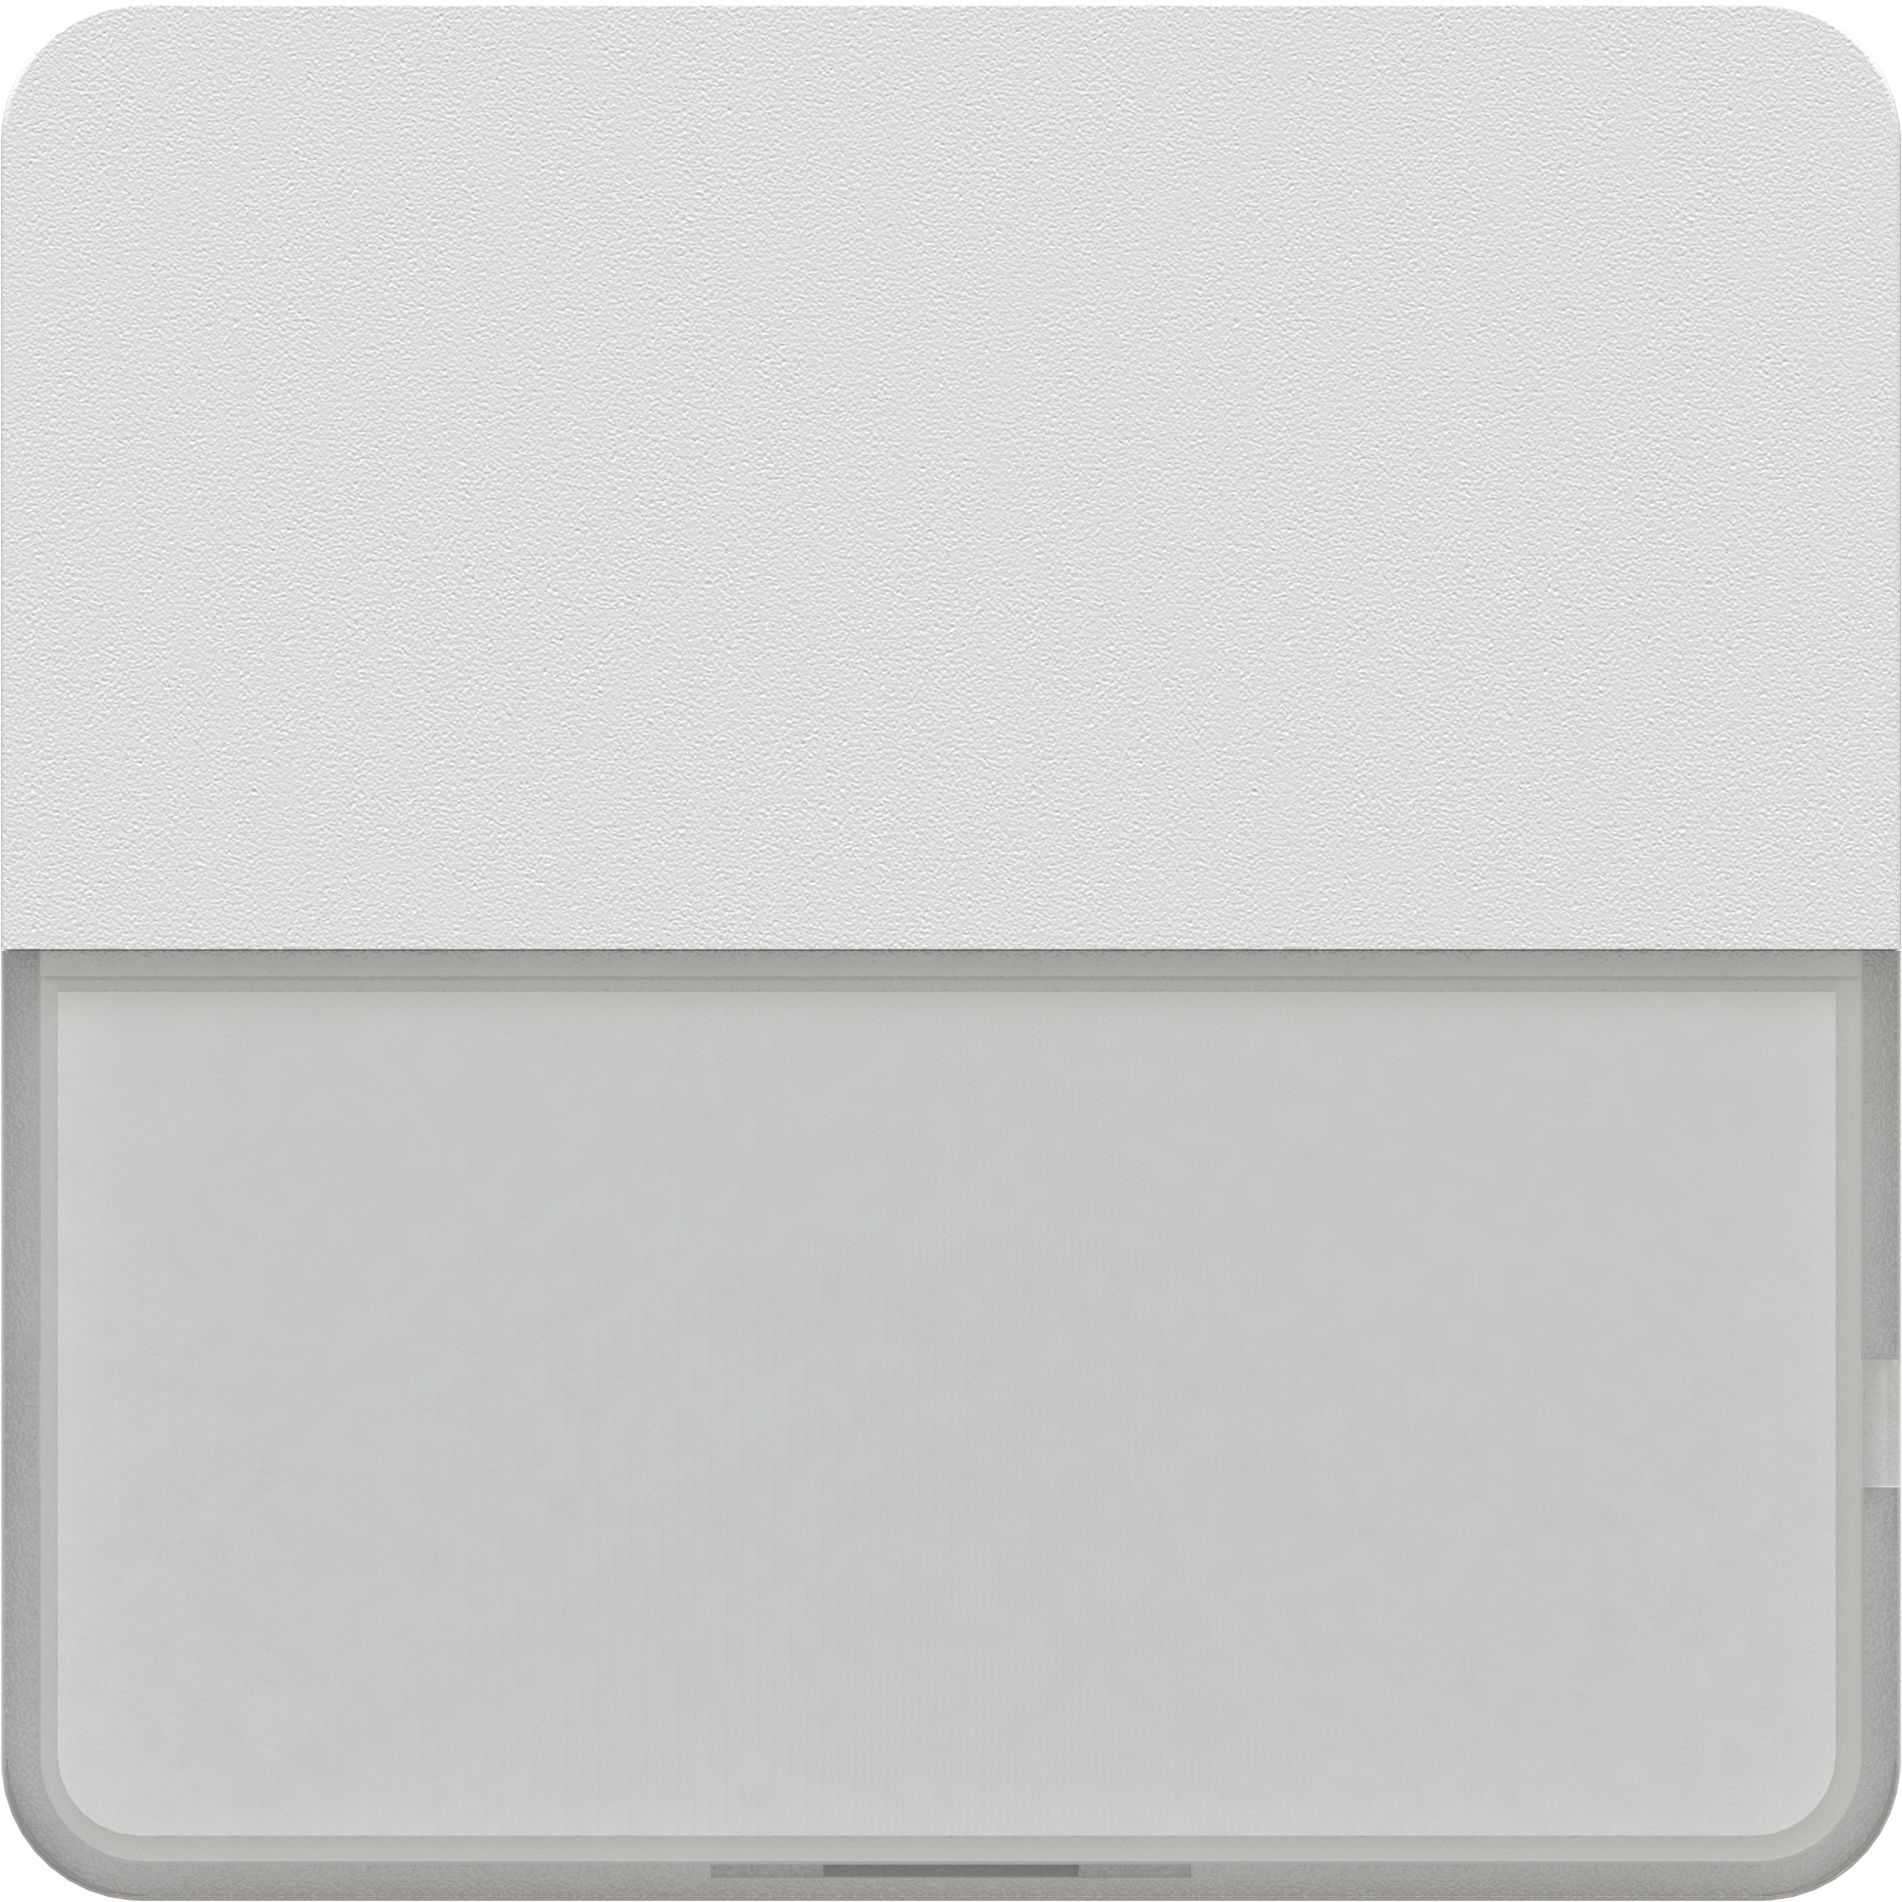 Central plate to wall switch sonnerie priamos white